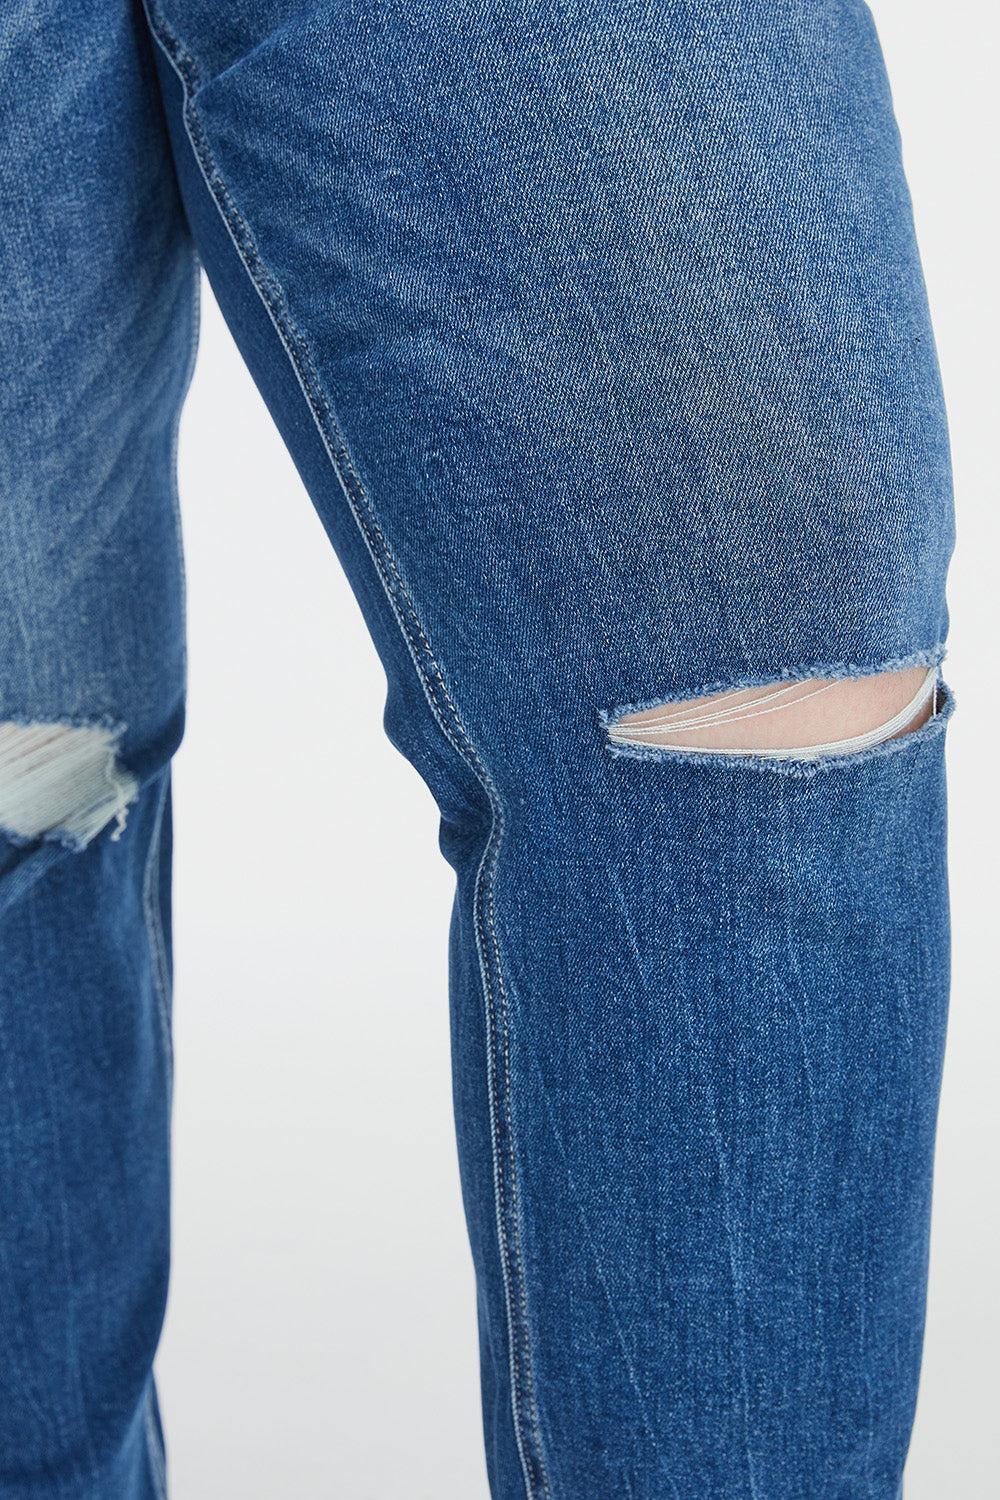 a pair of blue jeans with holes in them